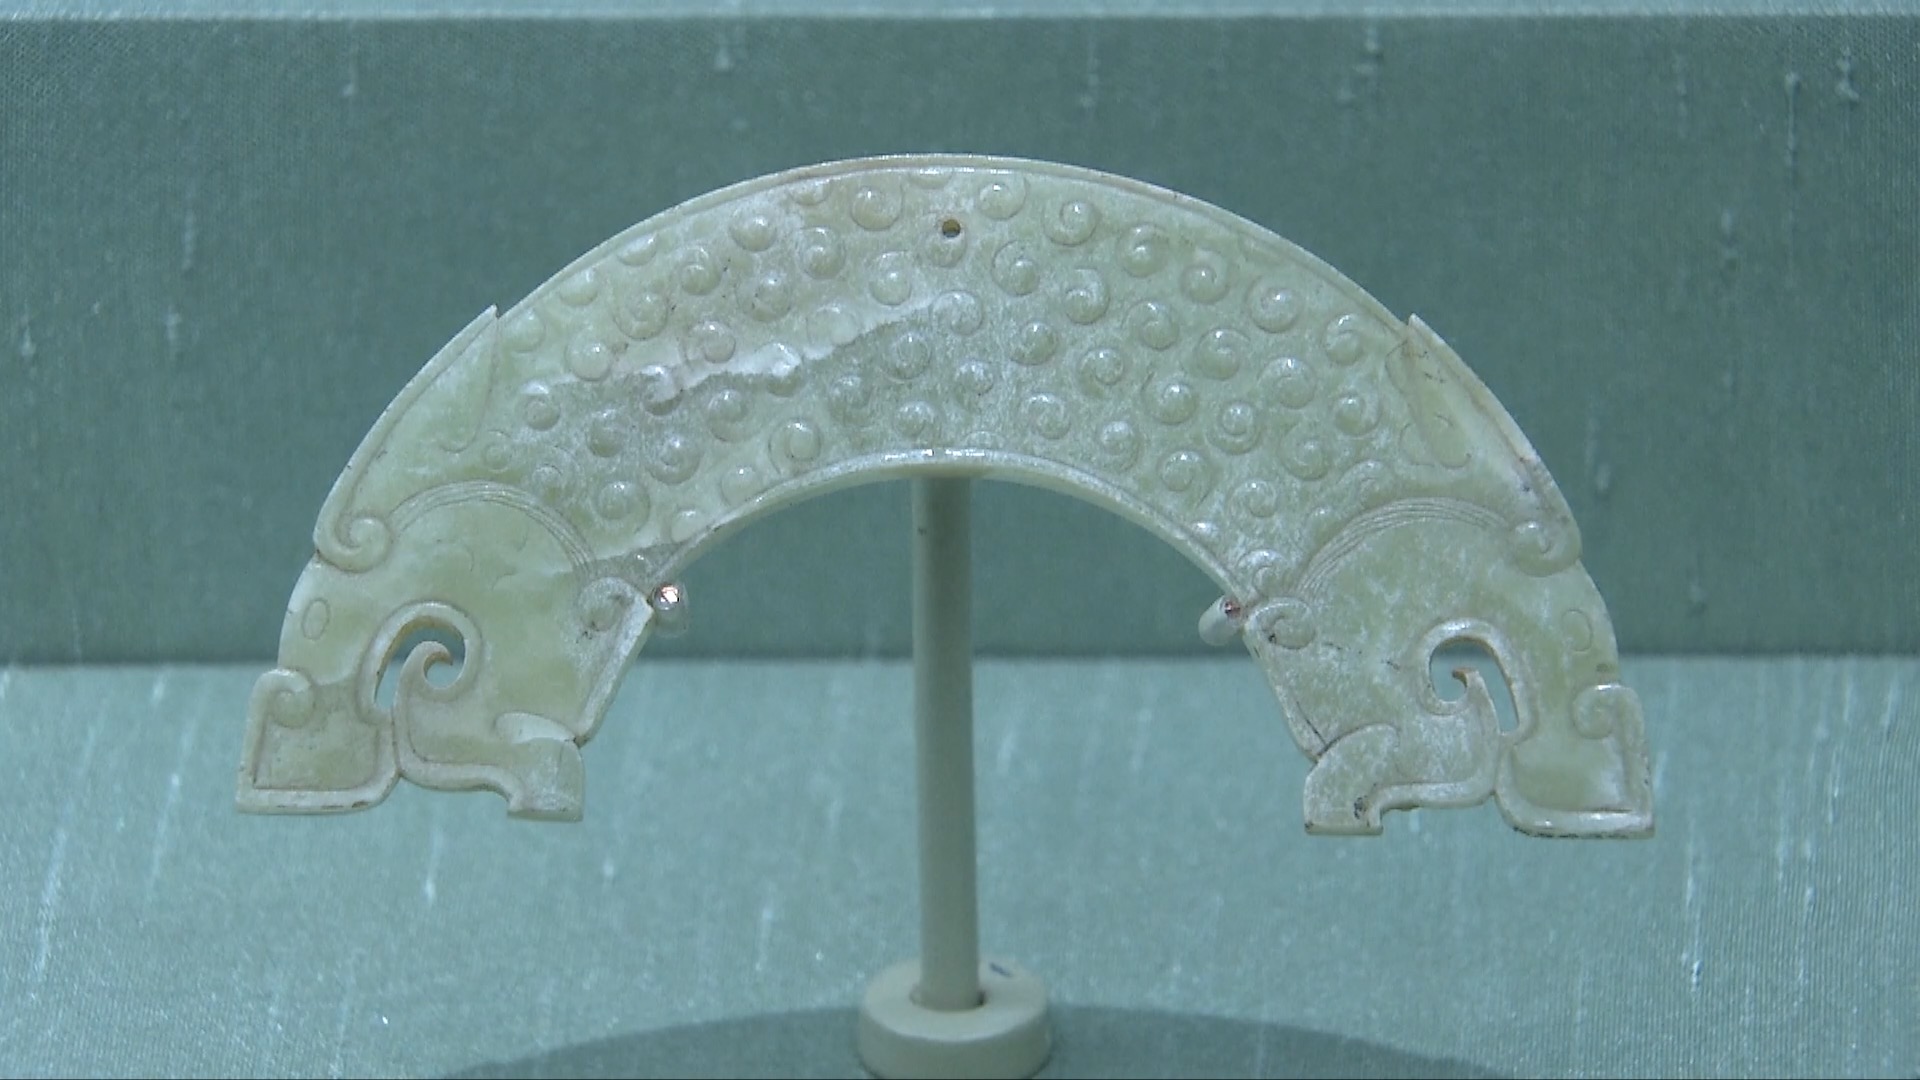 Jade with dragon patterns on display at the National Museum of China. / CGTN